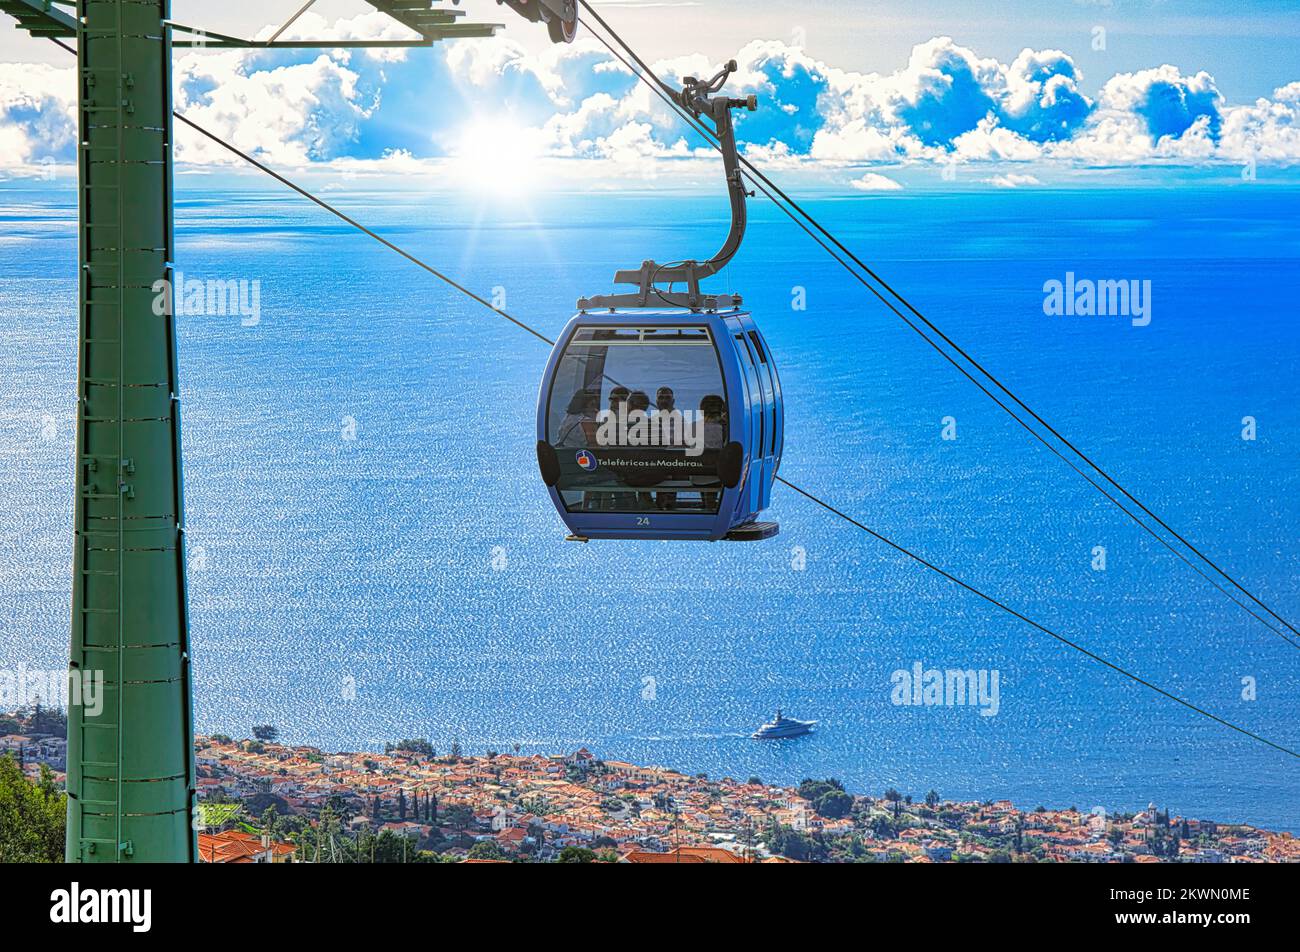 Madeira island - Cable car at Monte high above the rooftops and streets of Funchal the capital city with sunburst through clouds. Stock Photo